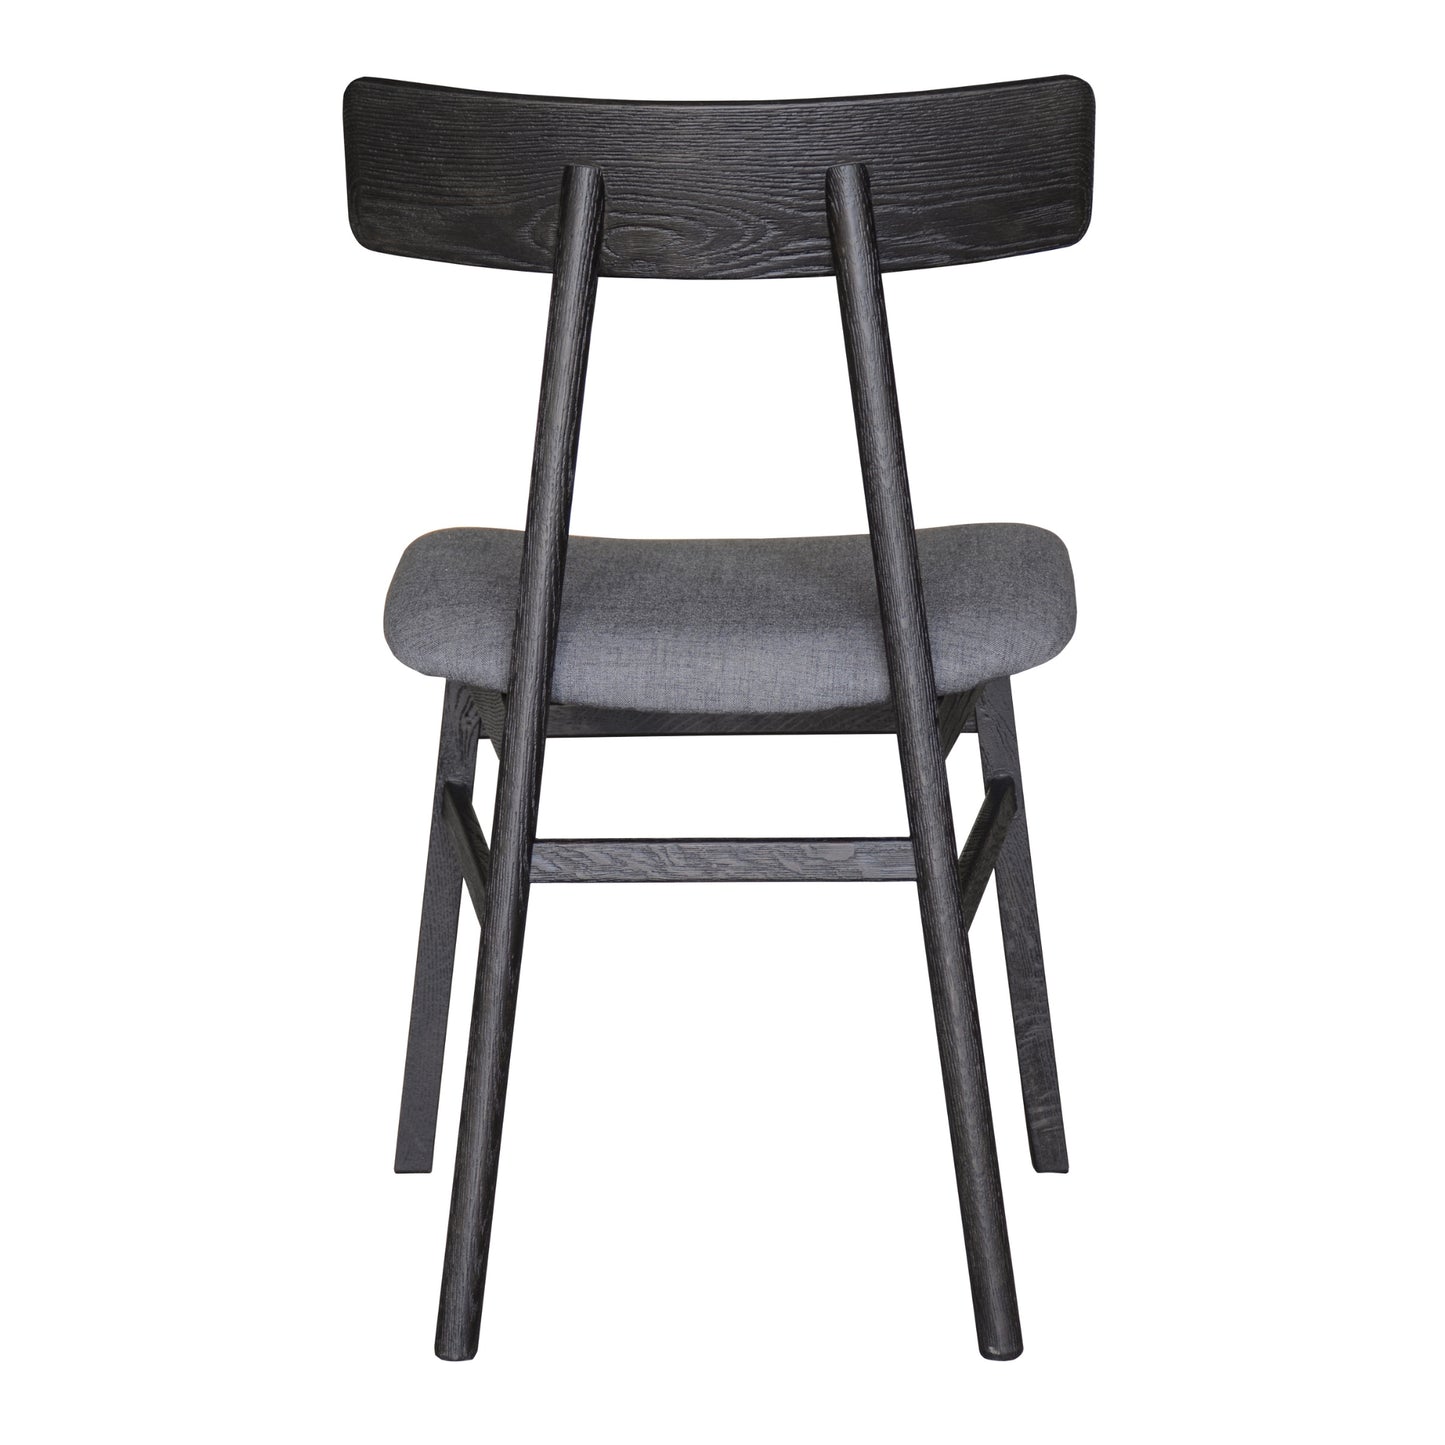 Claire Dining Chair Set of 8 Solid Oak Wood Fabric Seat Furniture - Black